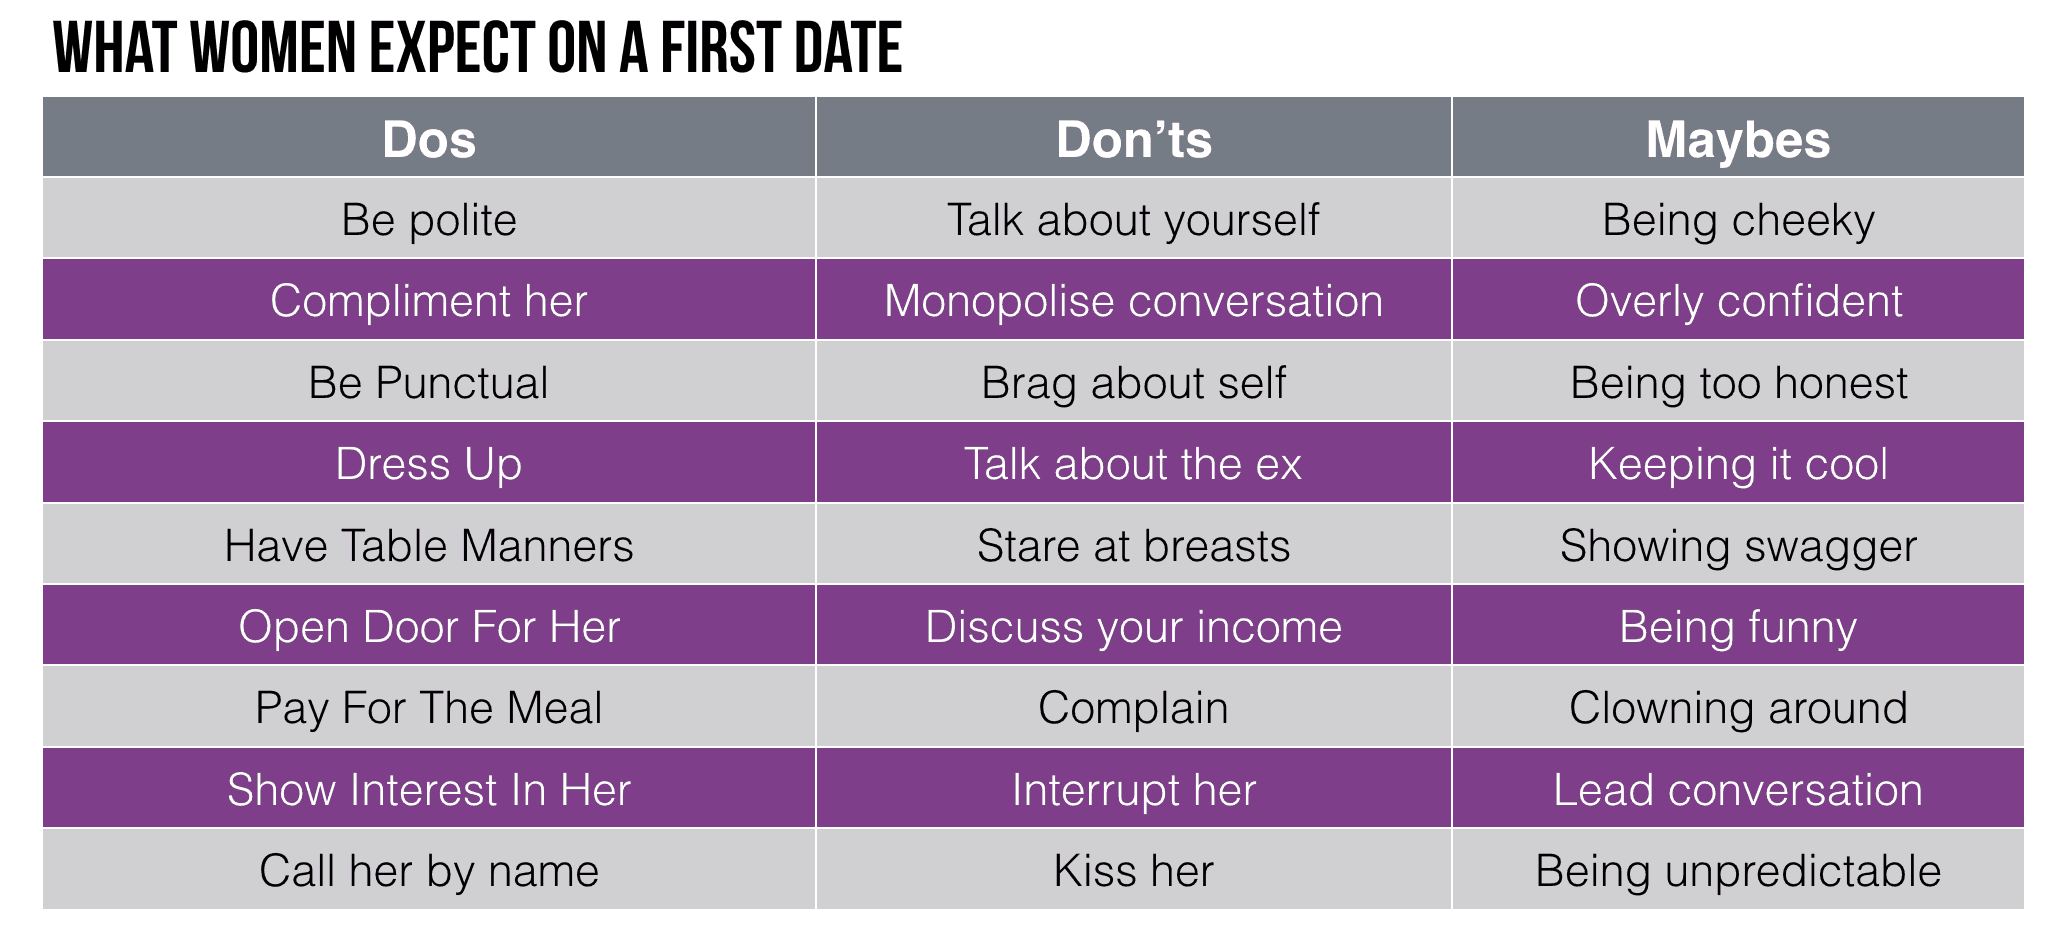 What to expect in the first month of dating?